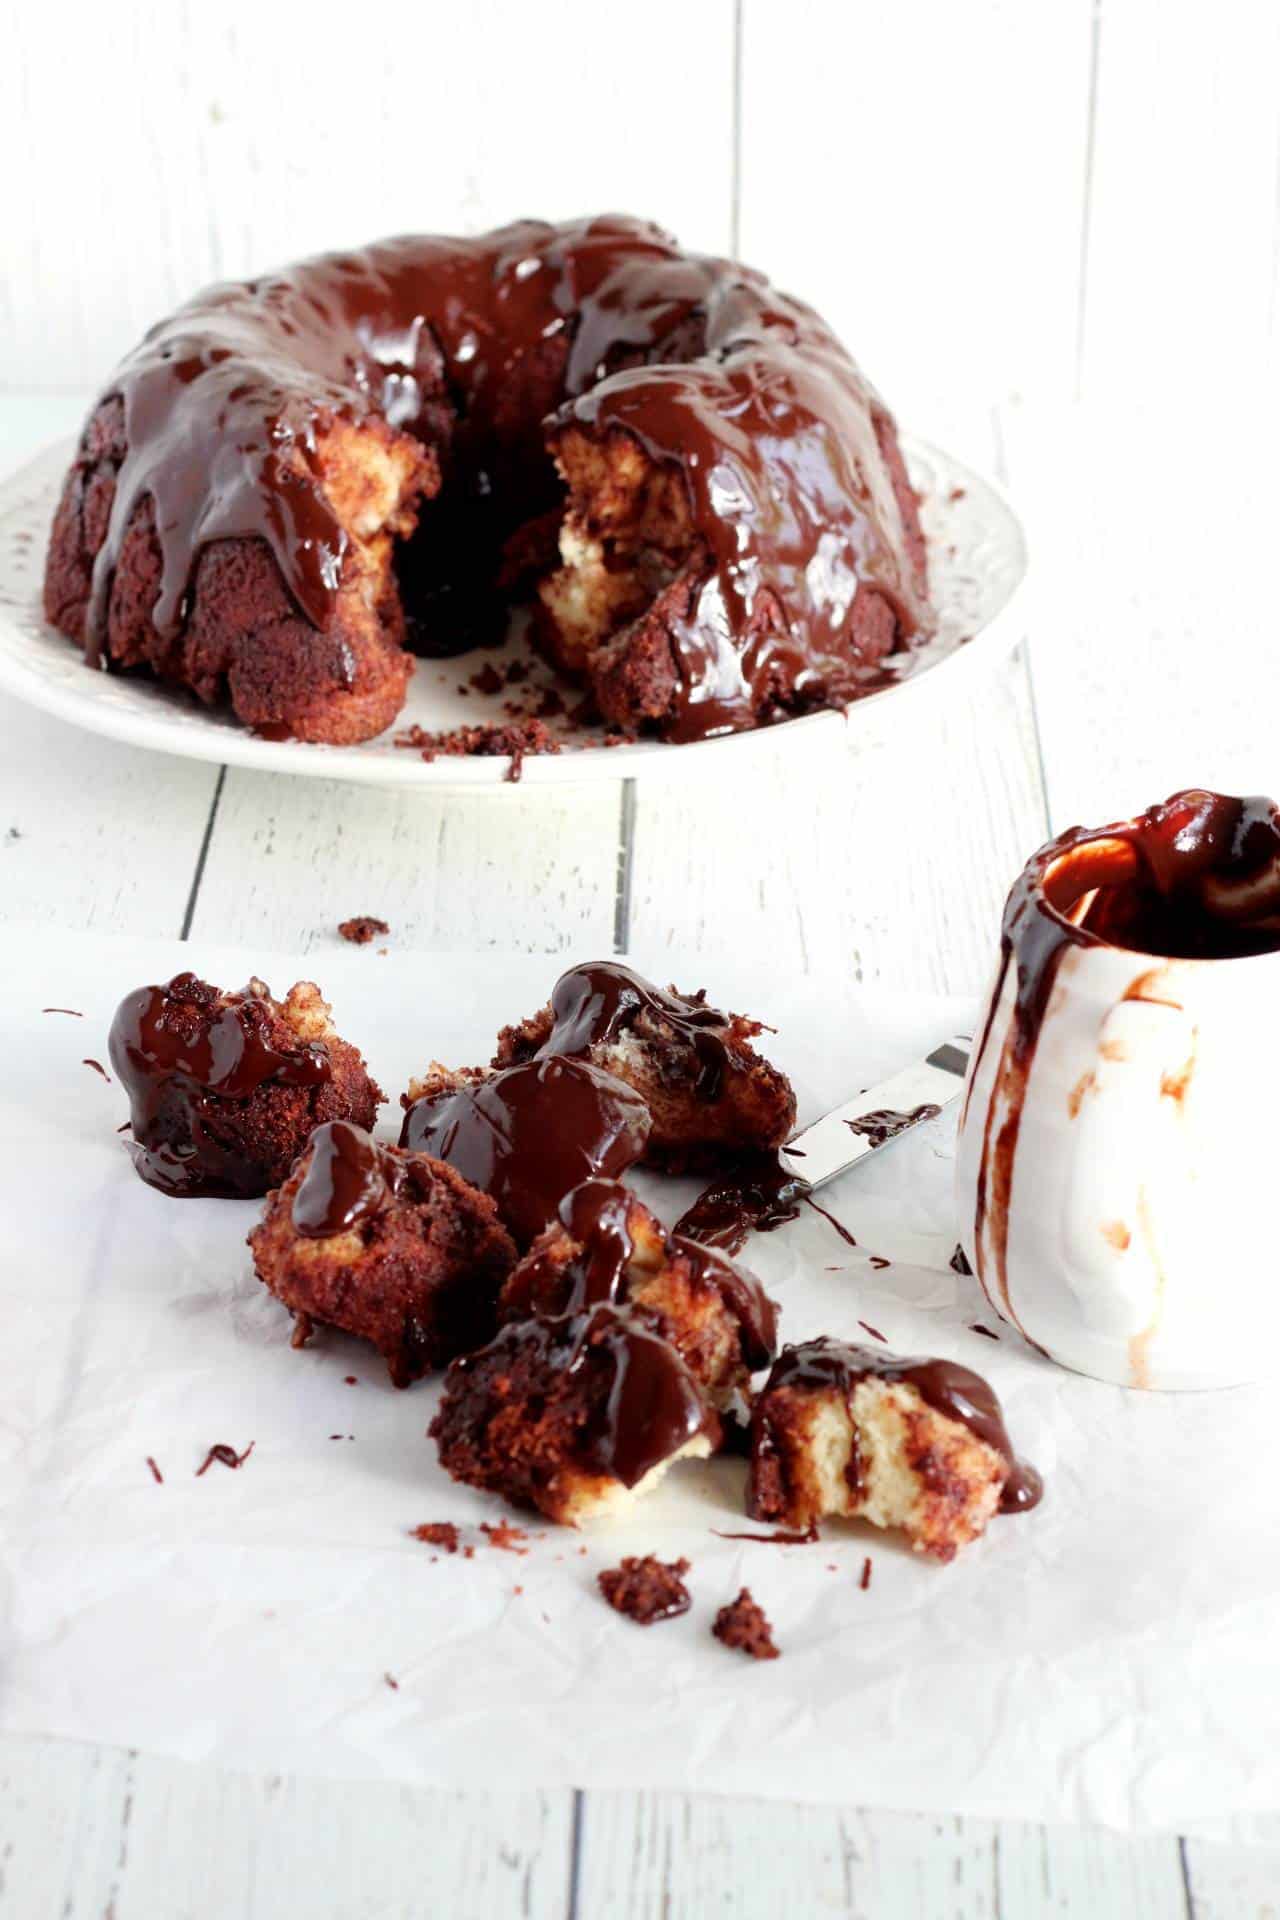 Chocolate bundt monkey bread laying in the background. Small pieces of baked monkey bread covered in messy chocolate glaze layed on white parchemnt paper